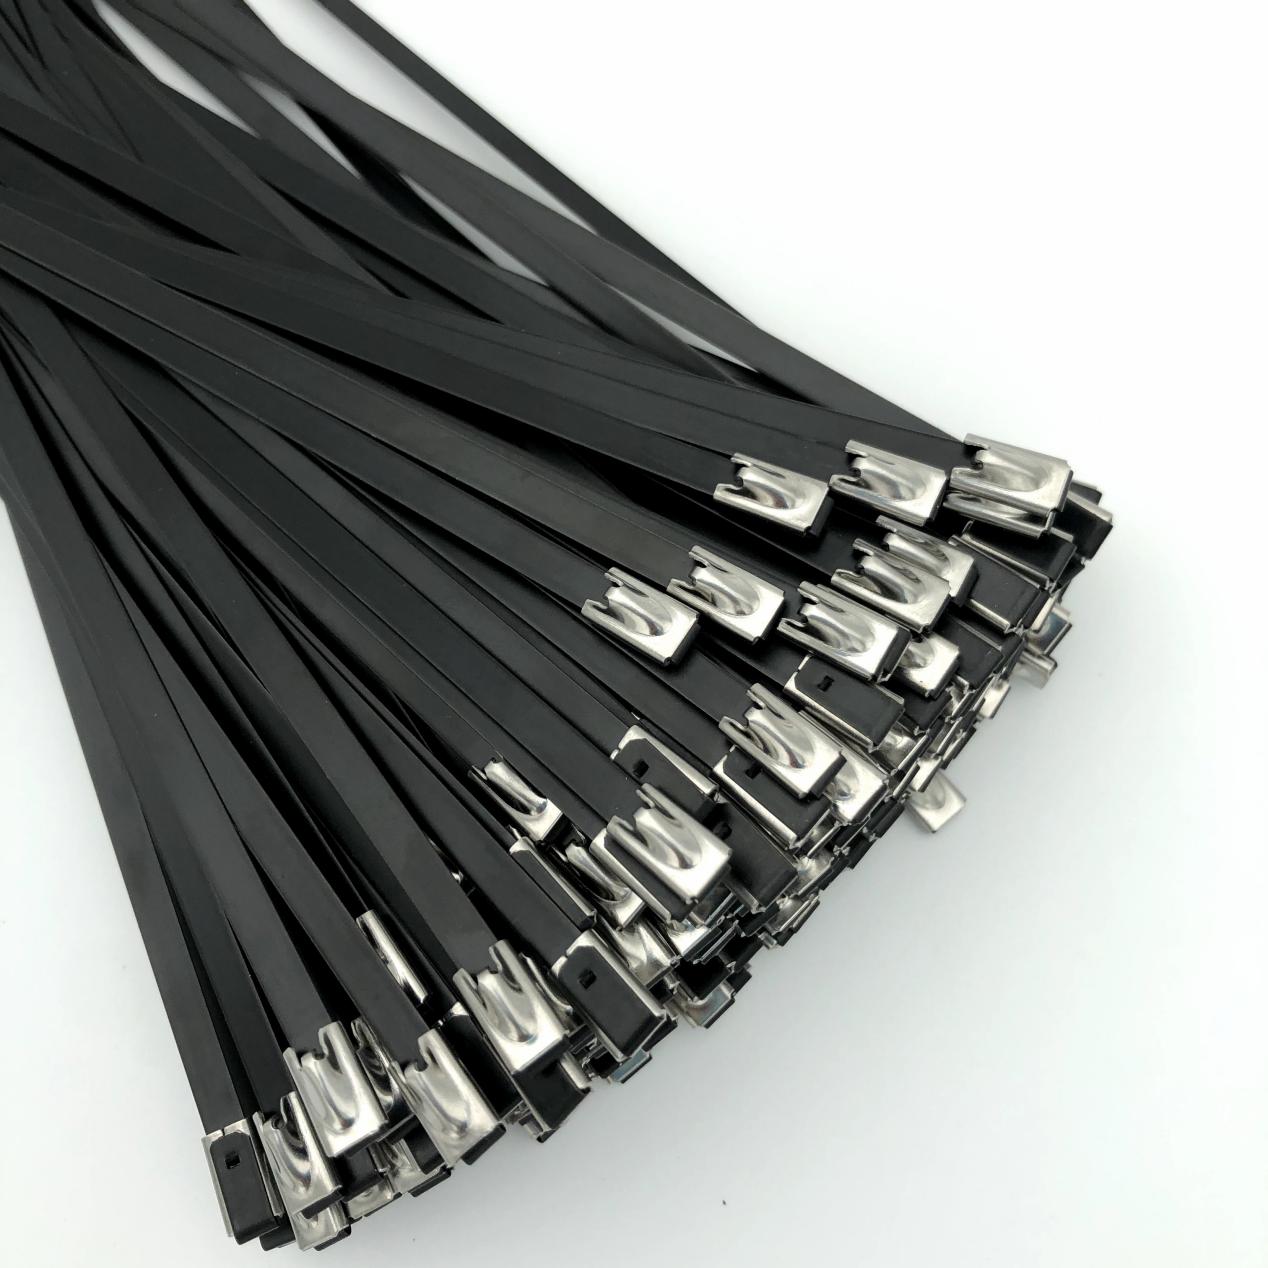 High-Quality Black Stainless Steel Zip Ties for Diverse Applications